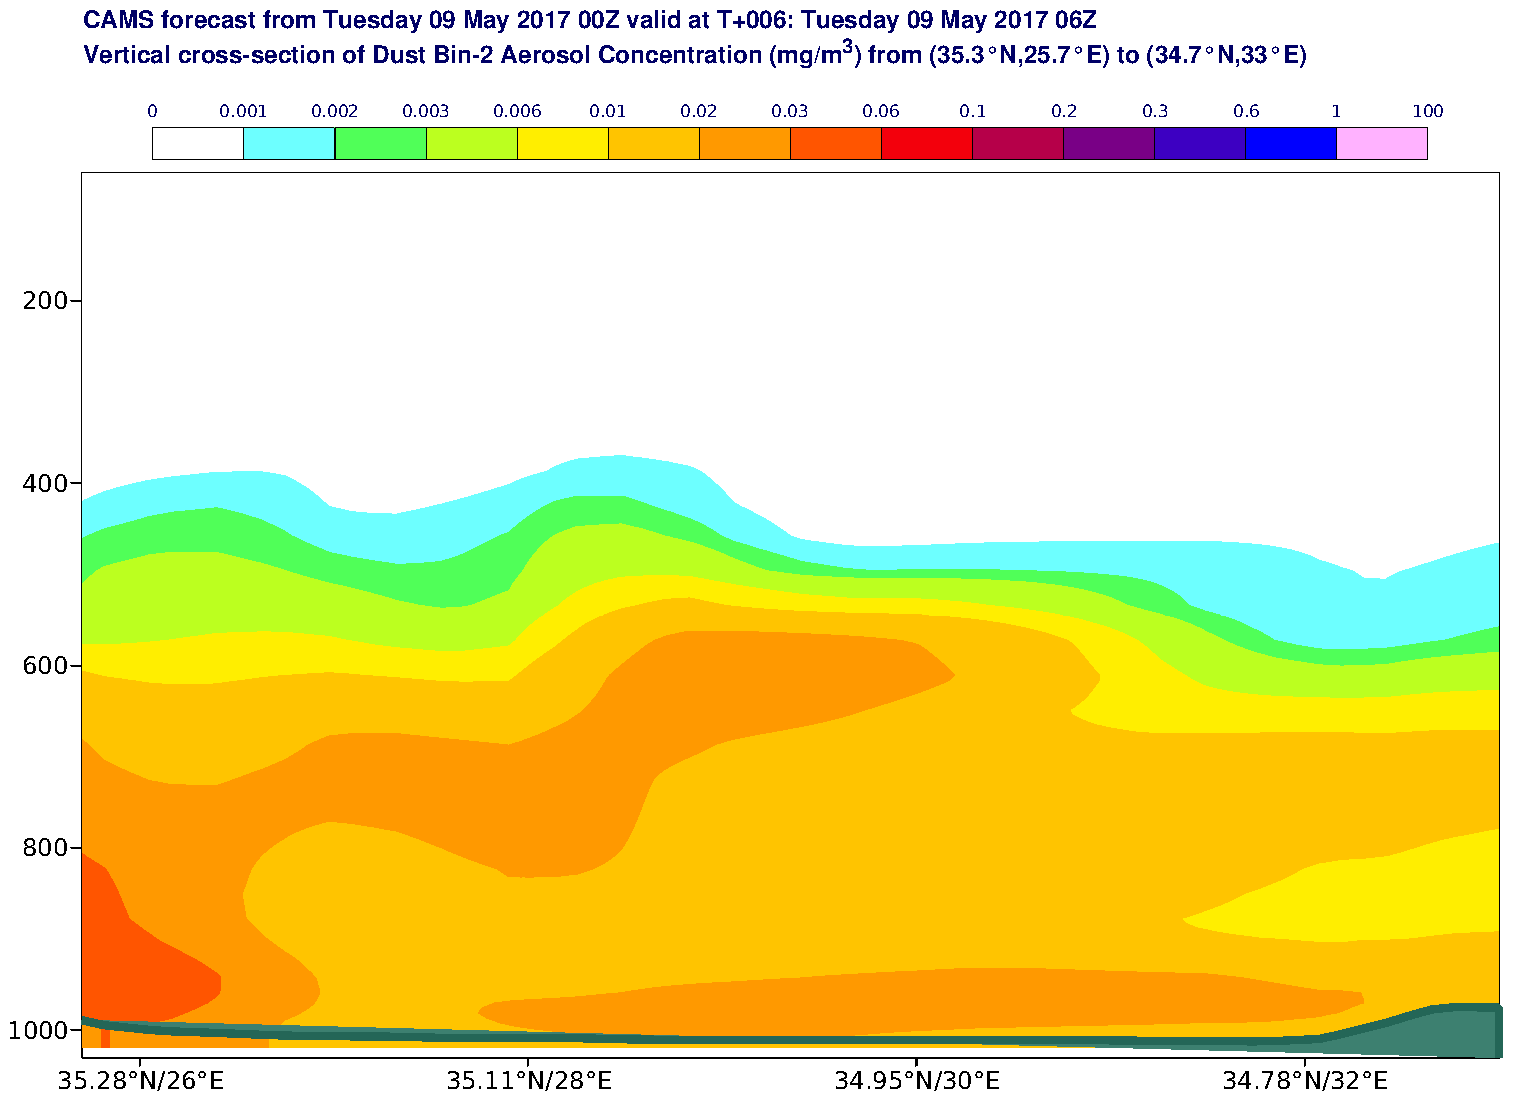 Vertical cross-section of Dust Bin-2 Aerosol Concentration (mg/m3) valid at T6 - 2017-05-09 06:00